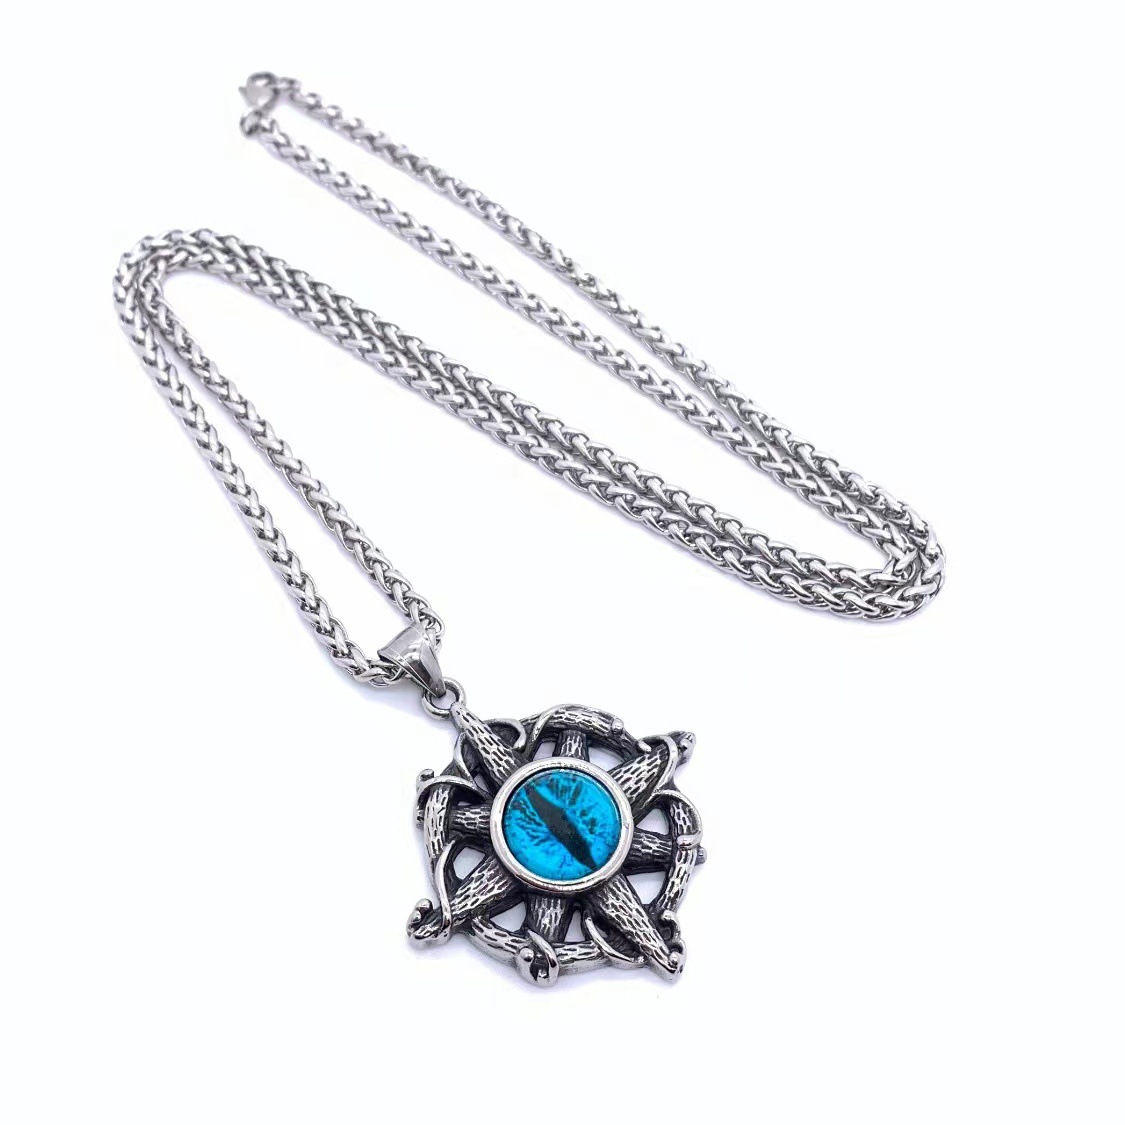 Blue-eye pendant with 70CM chain